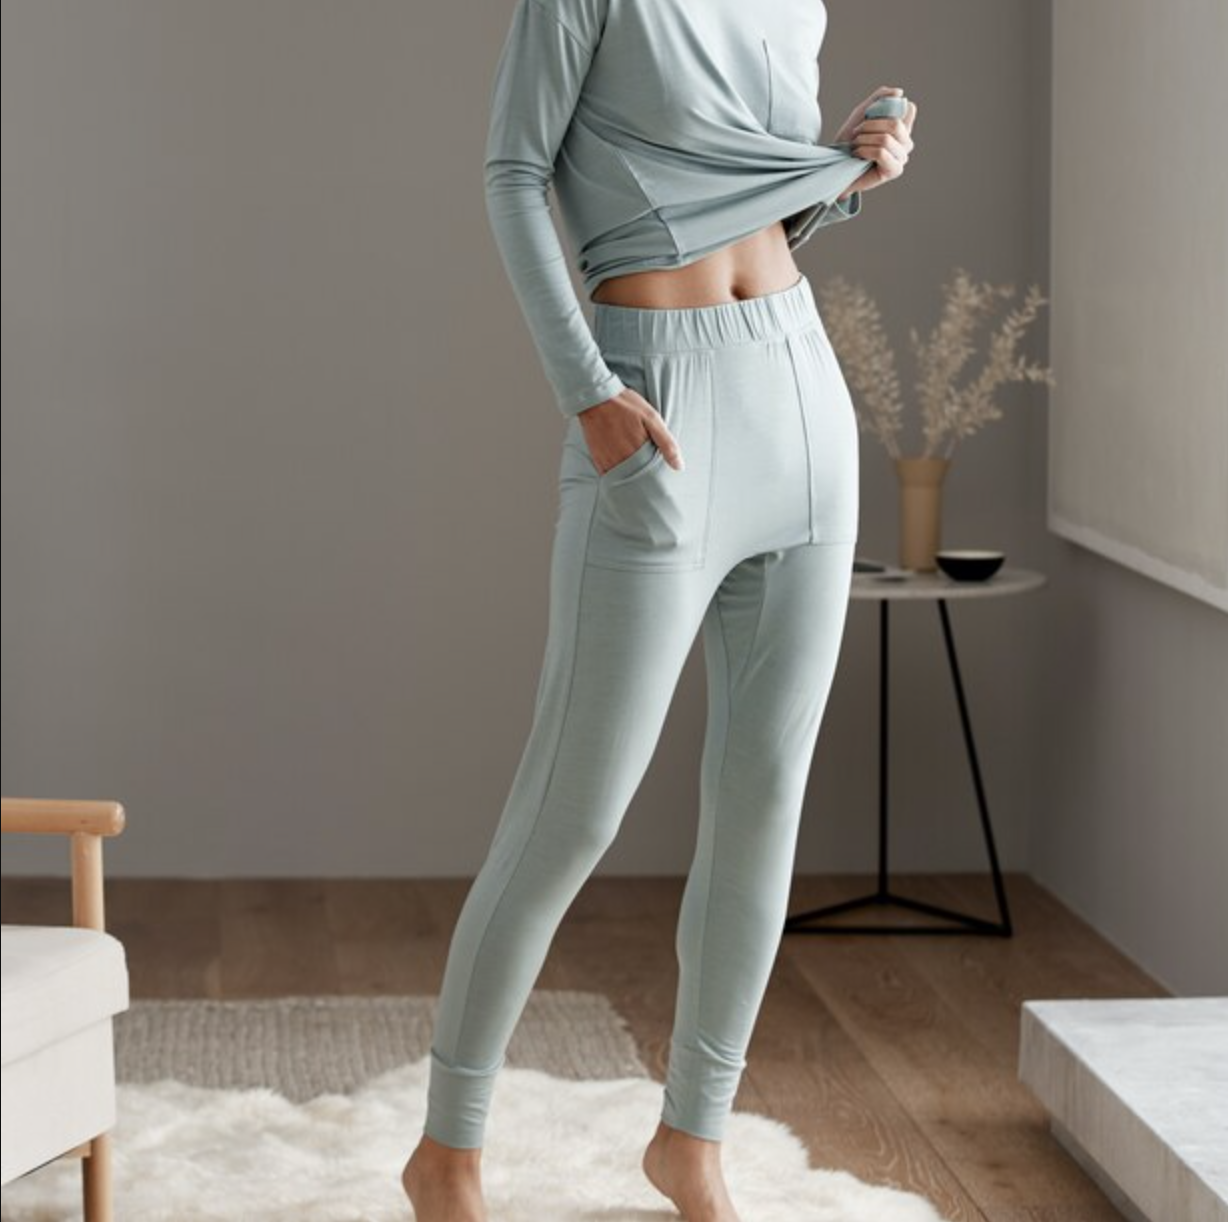 a person wearing the slim fit joggers made of eucalyptus fibres